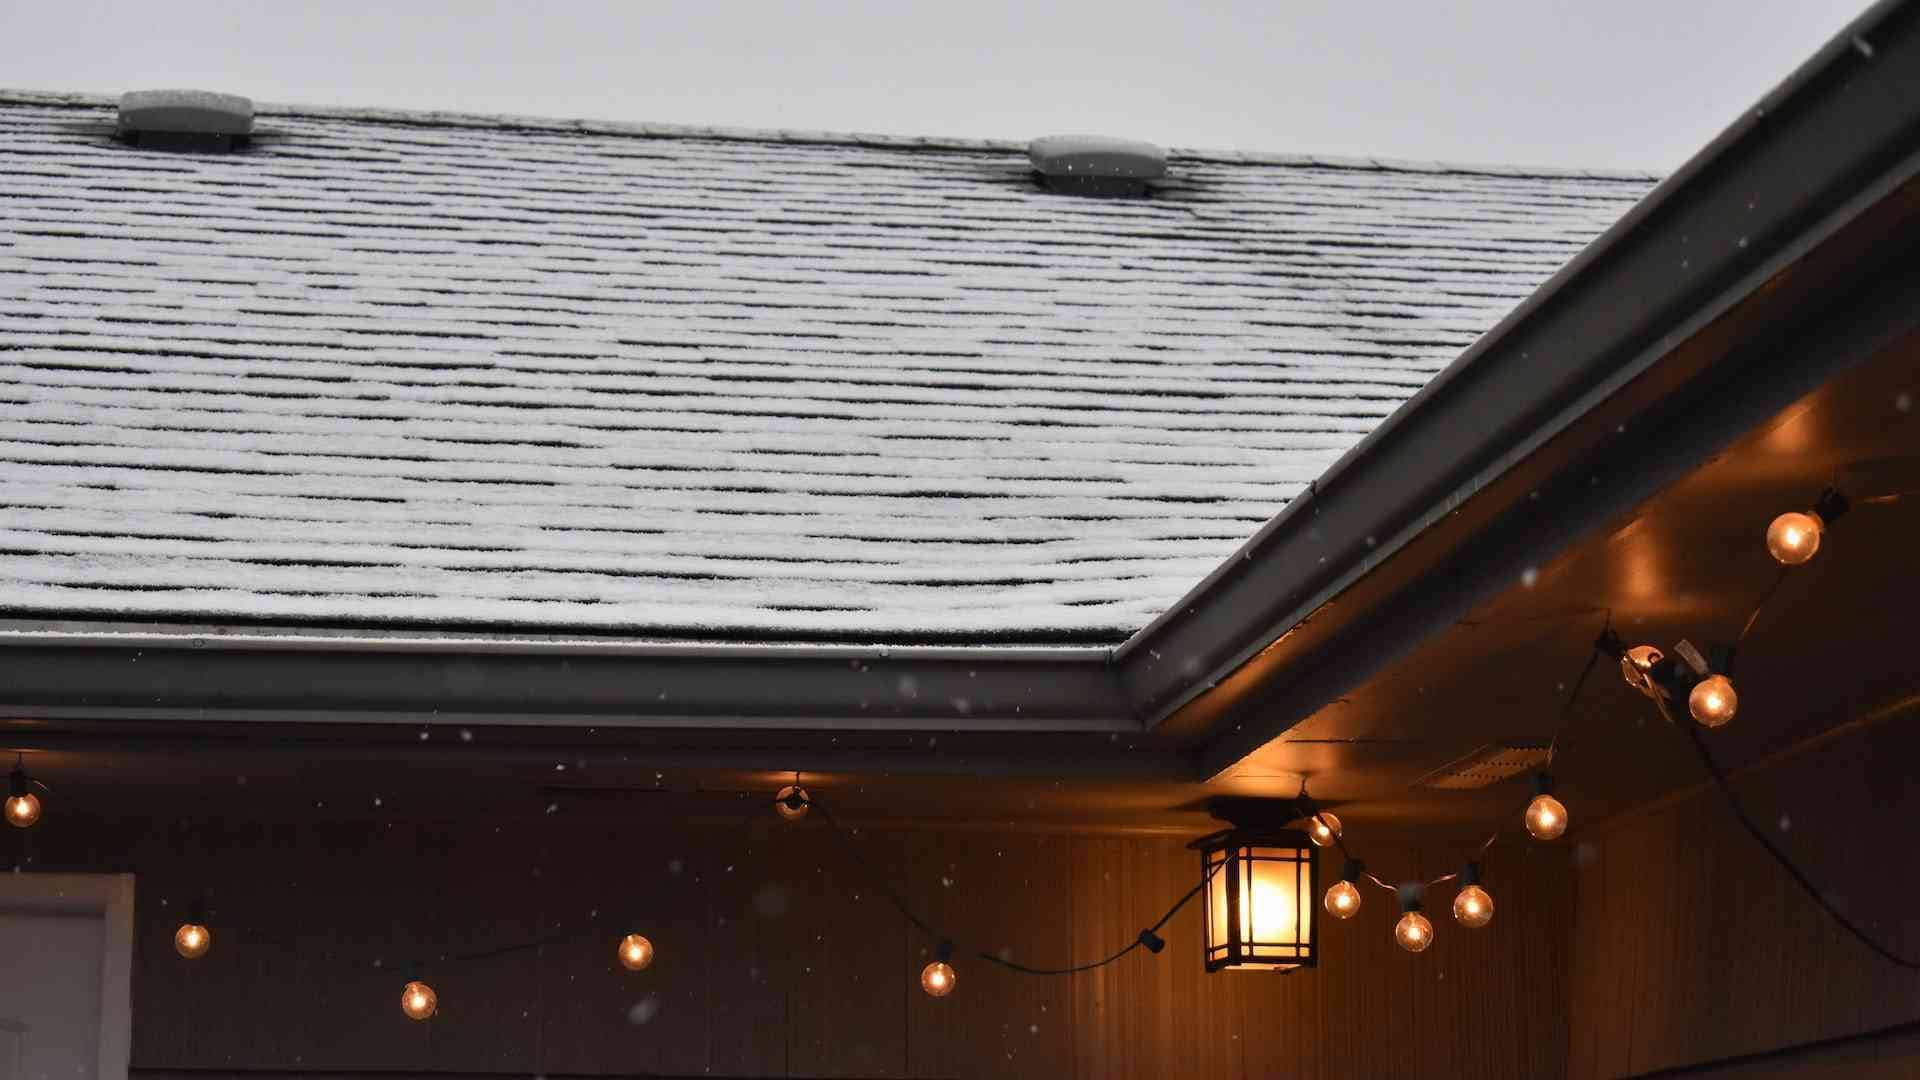 Asphalt roof with a light dusting of snow, installed by American Home Contractors in Berkeley Heights, NJ.